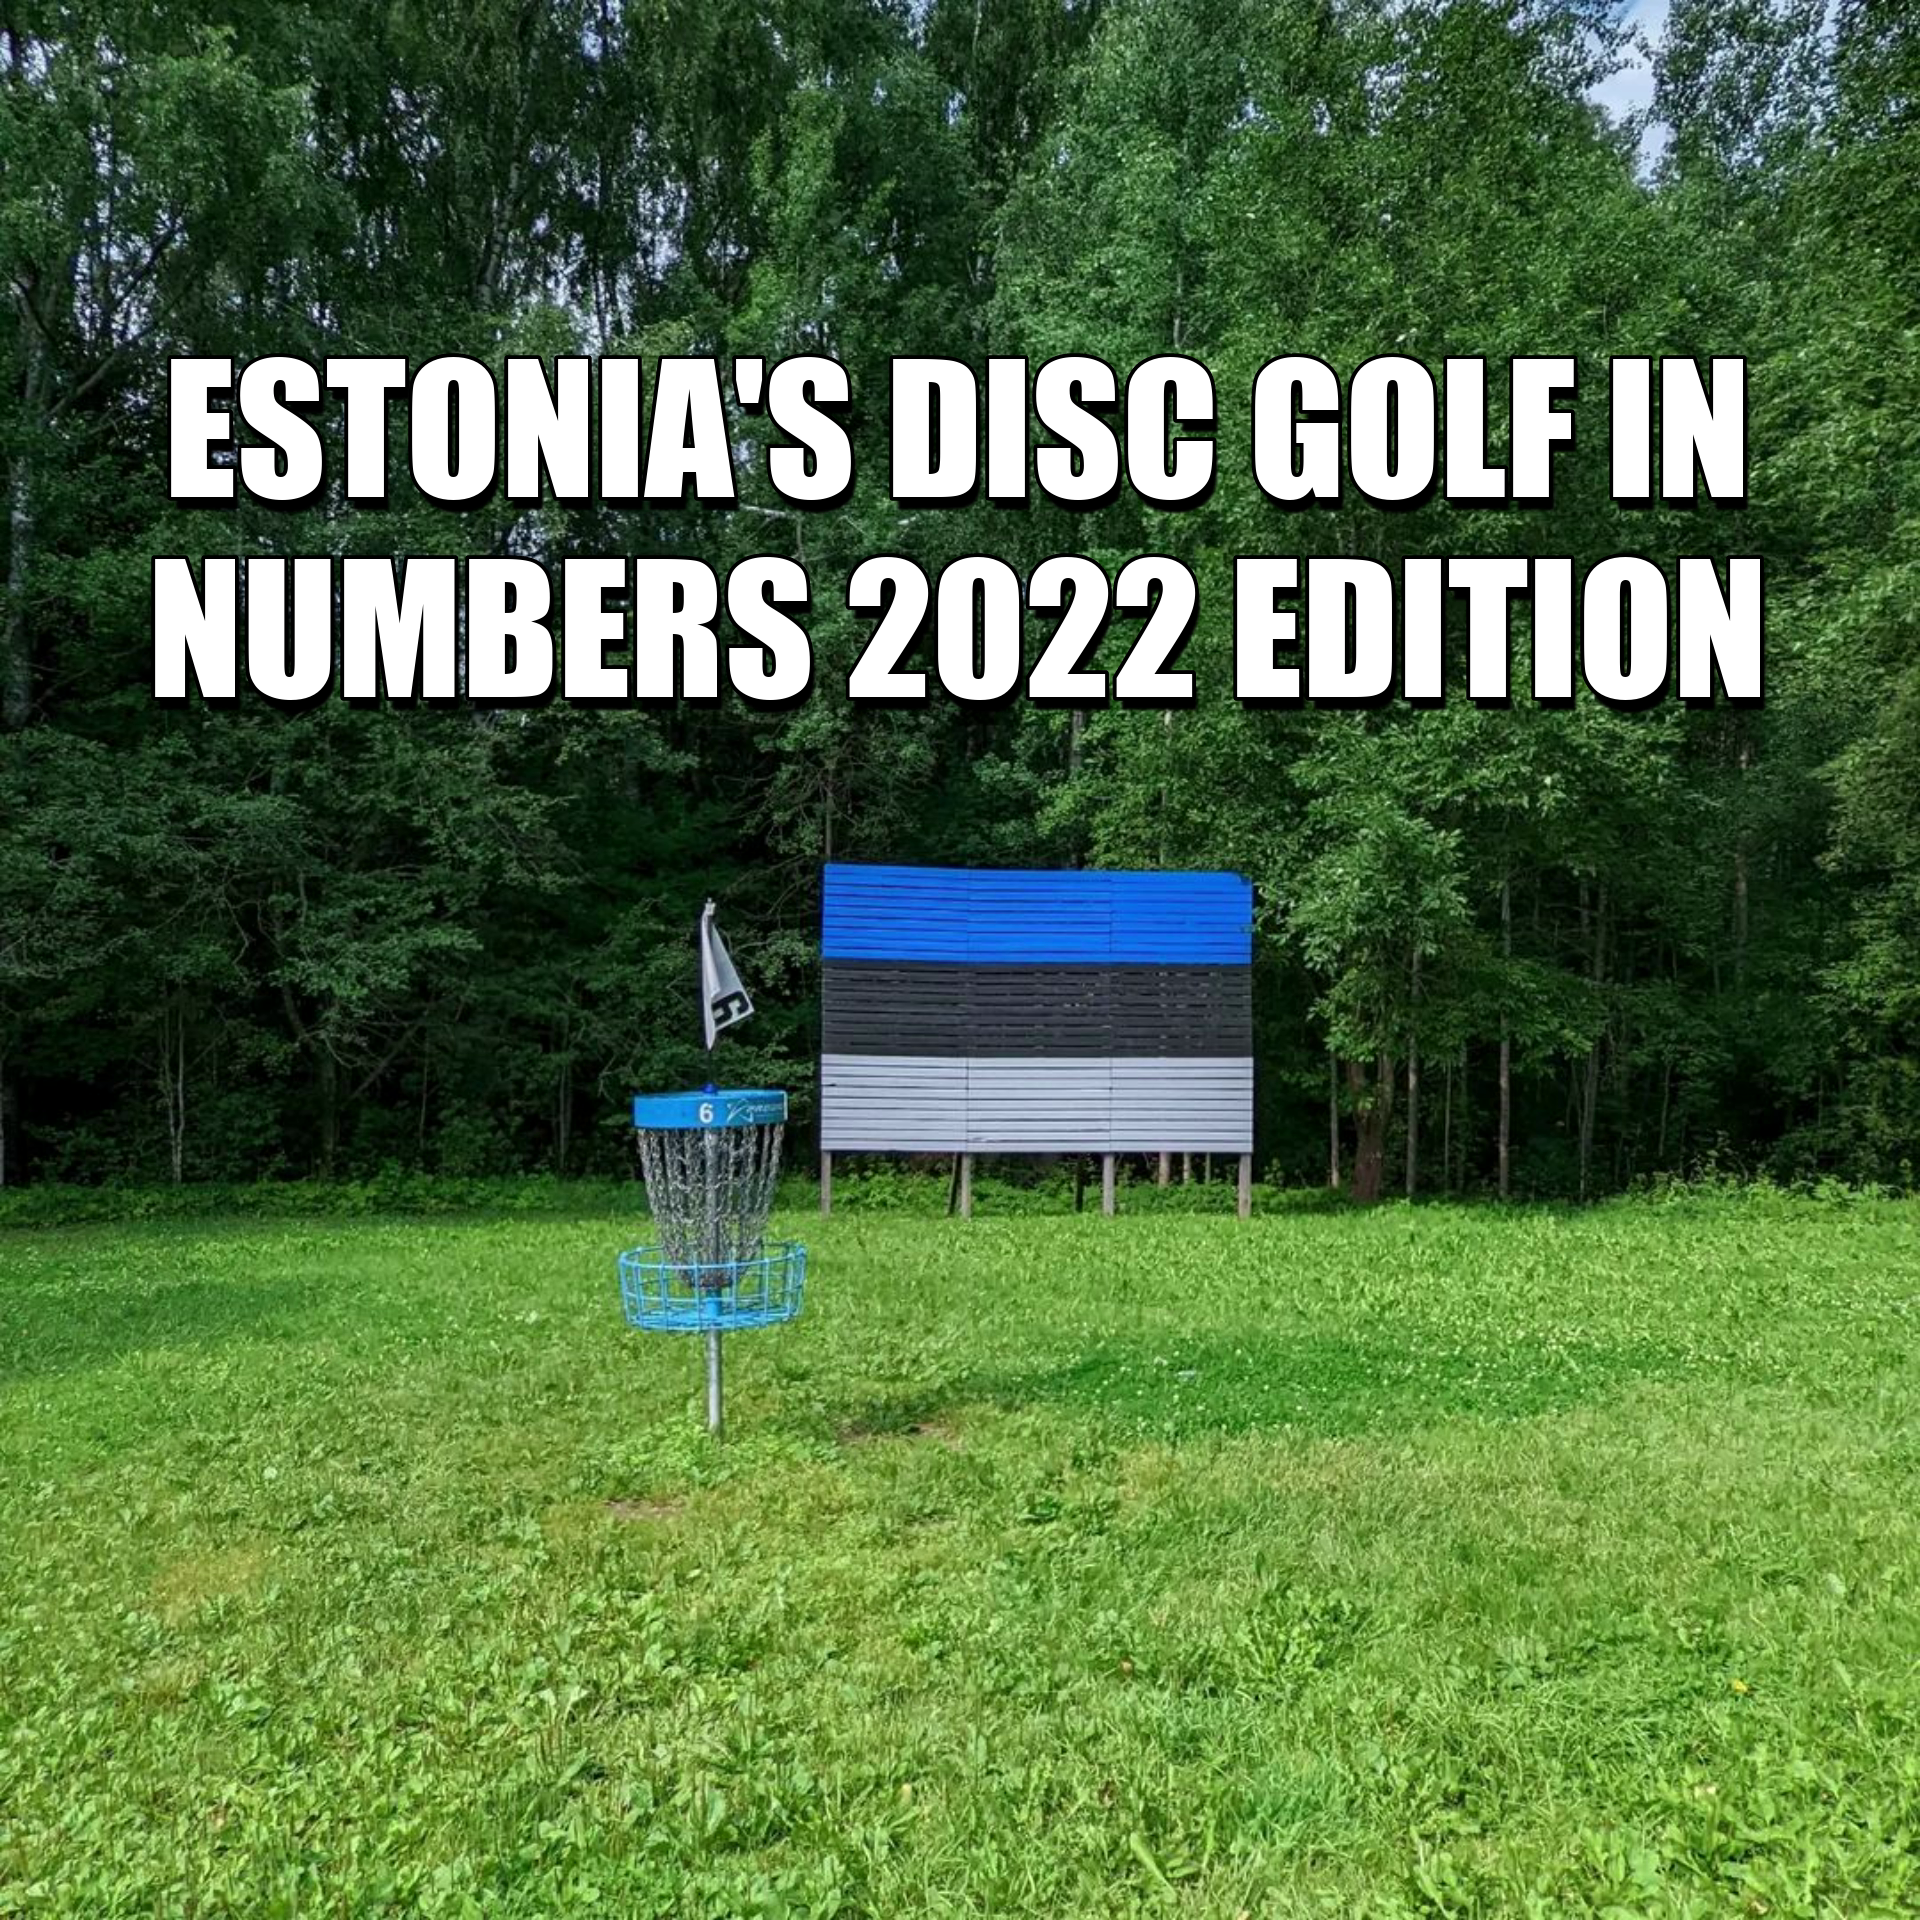 Estonia's disc golf in numbers, year 2022 edition